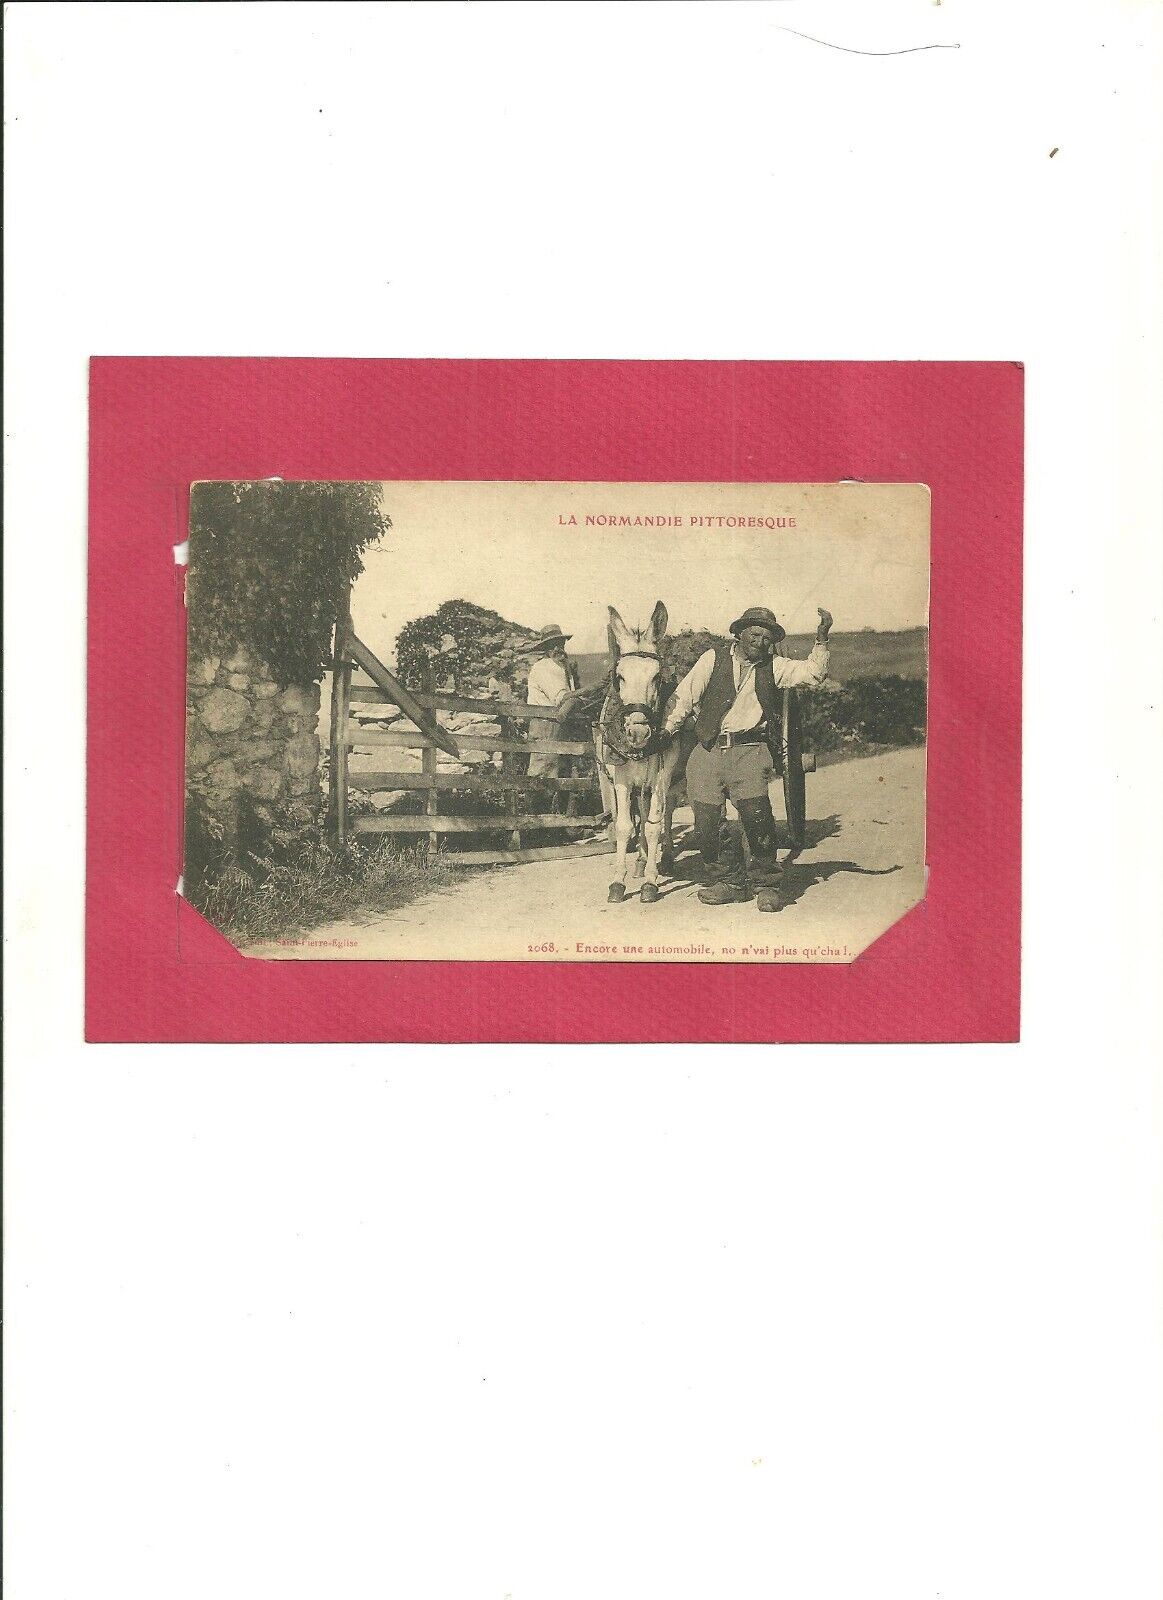 CP 31: CPA La Normandie Pictoresque: Peasants with Coupling (dated 1924)